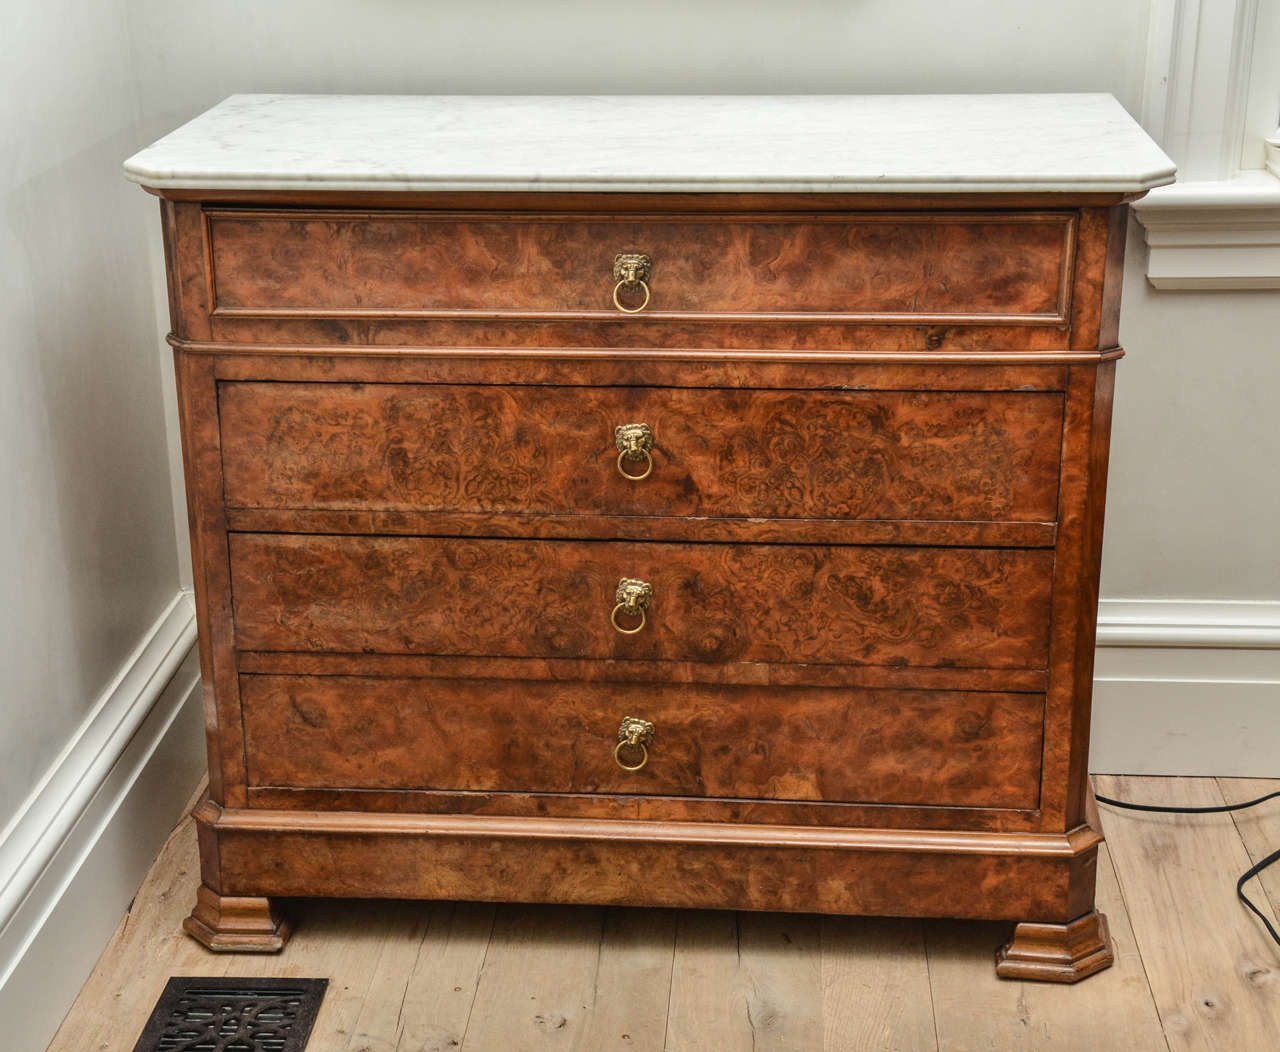 Stunning 19th century Louis Philippe commode in walnut with brass lion pulls and original white marble top.